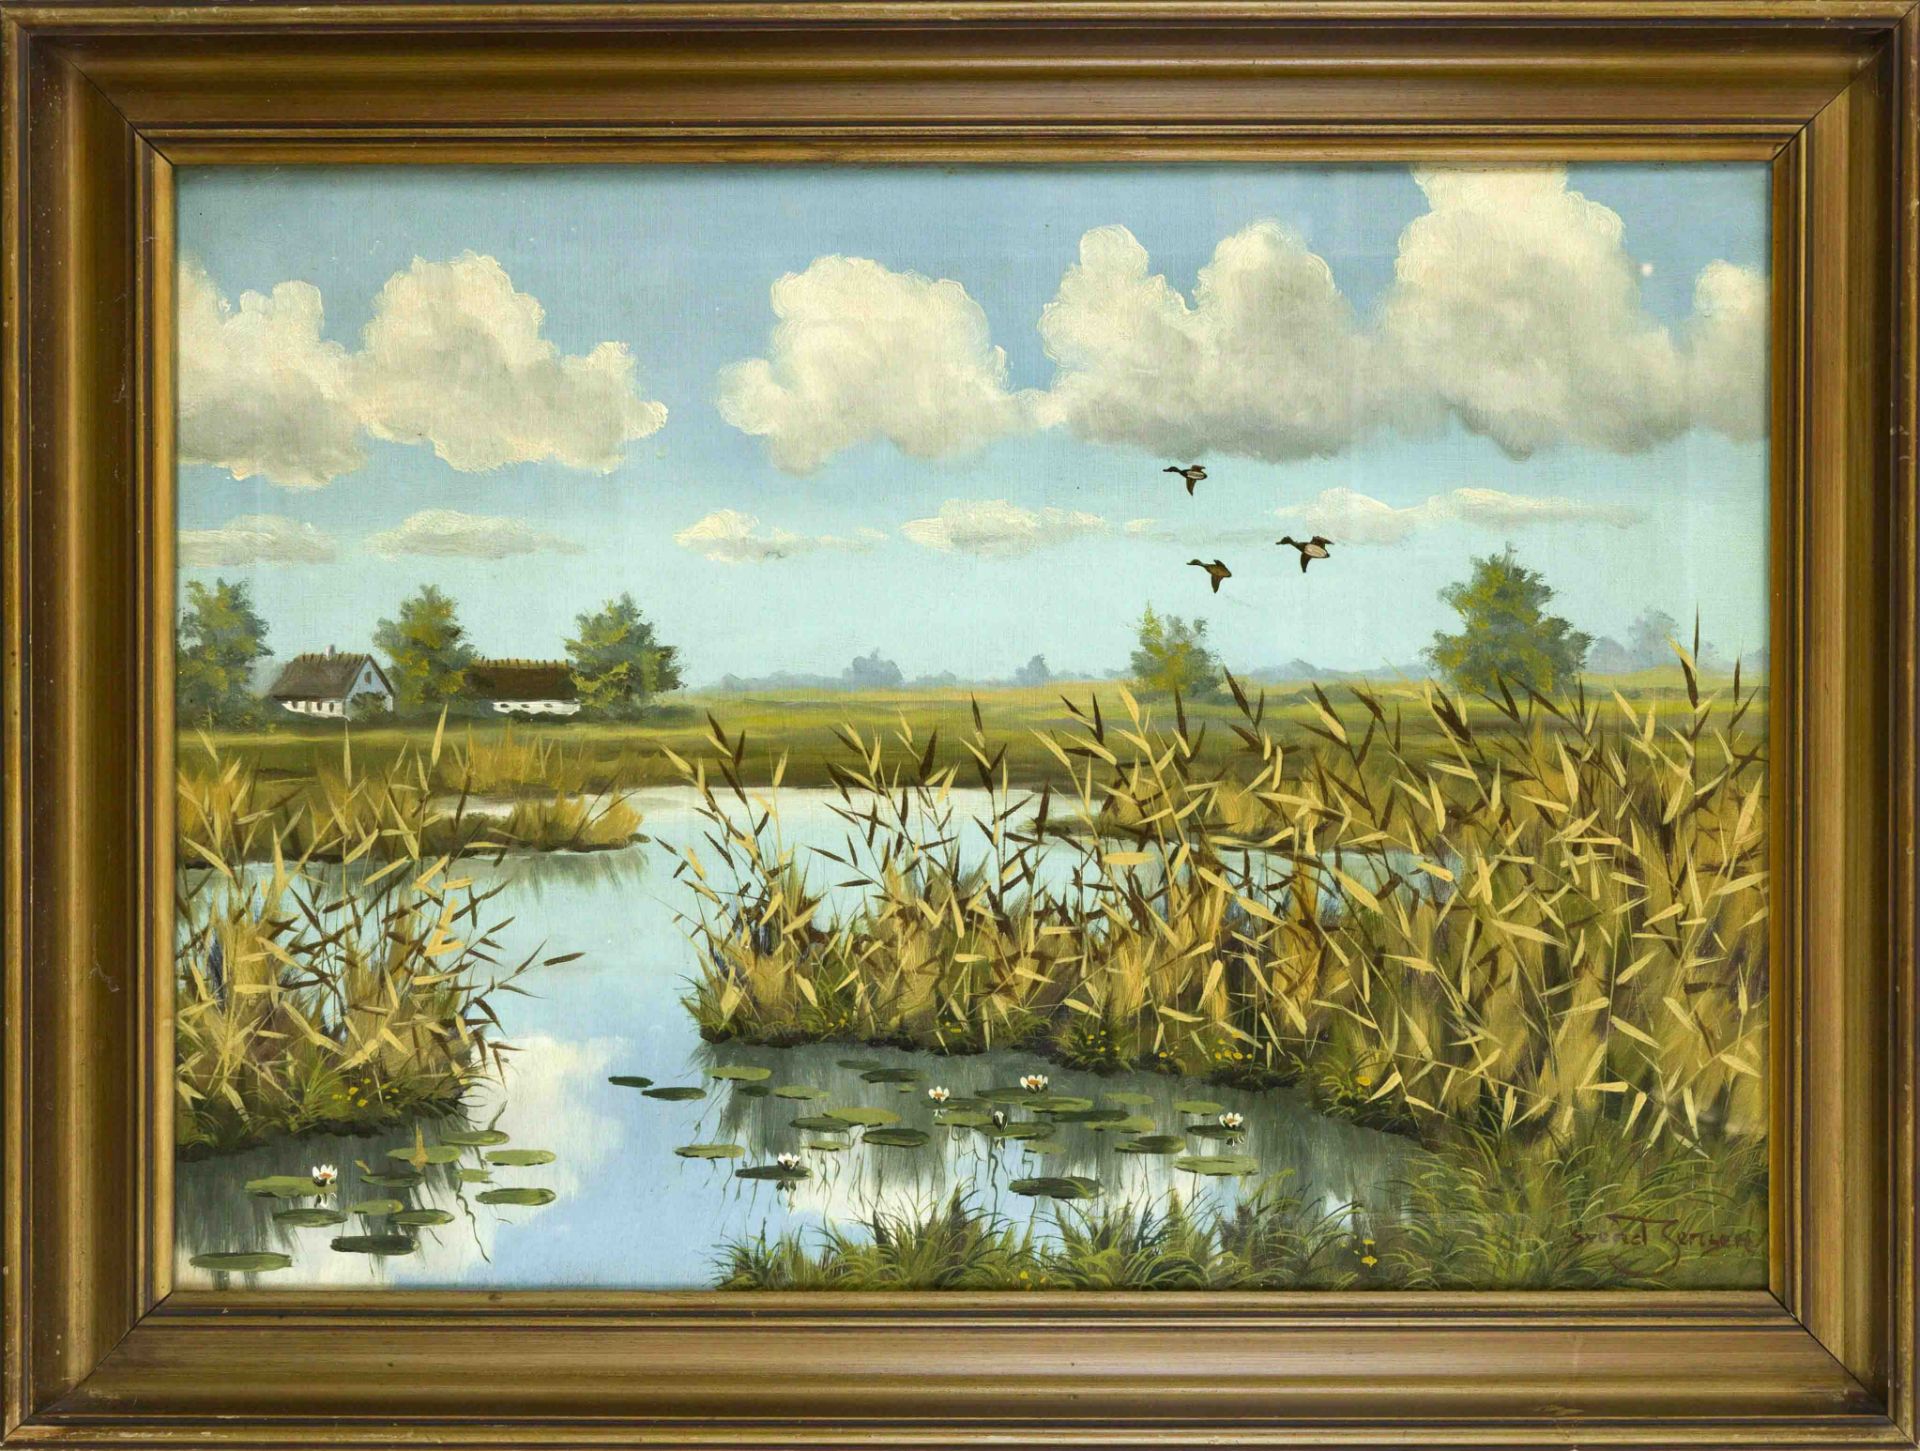 Svend Jensen, Danish painter 1st half 20th century, Pond with Reeds and Flying Ducks, oil on canvas,